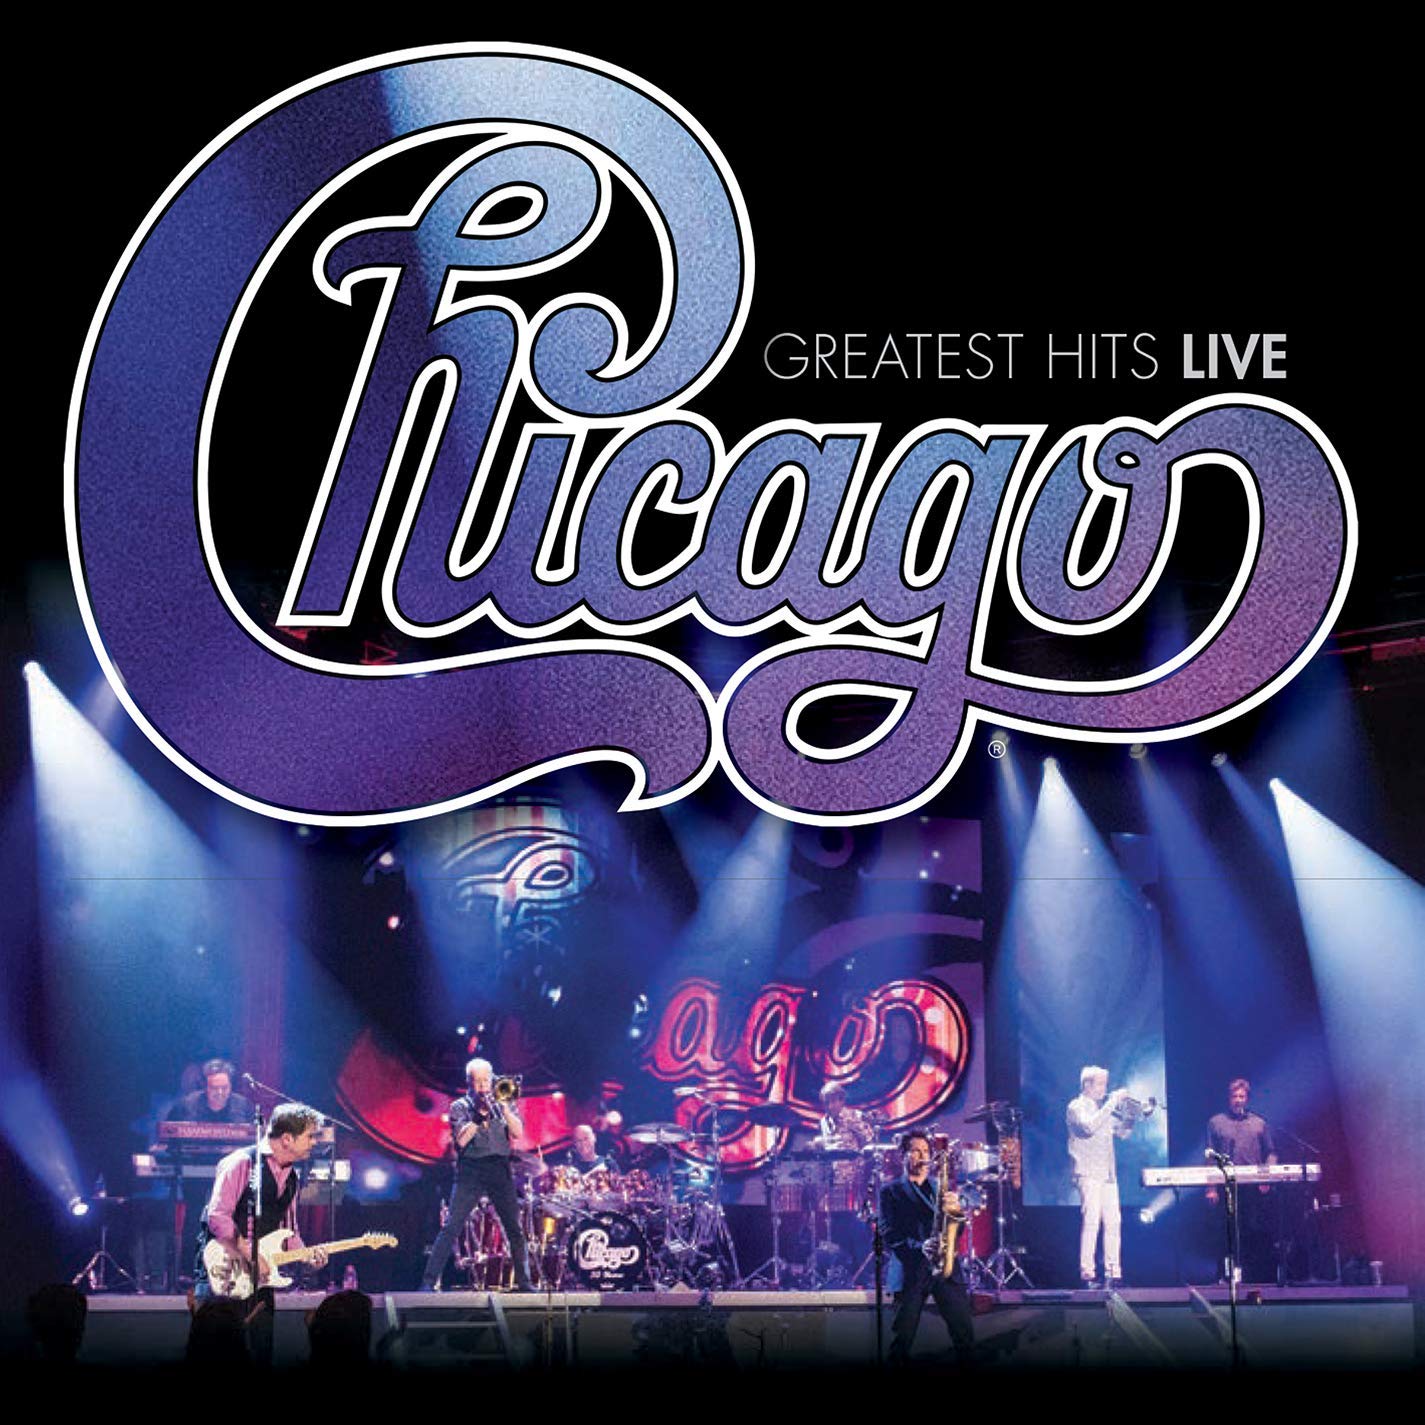 CHICAGO / シカゴ / GREATEST HITS LIVE (CD)